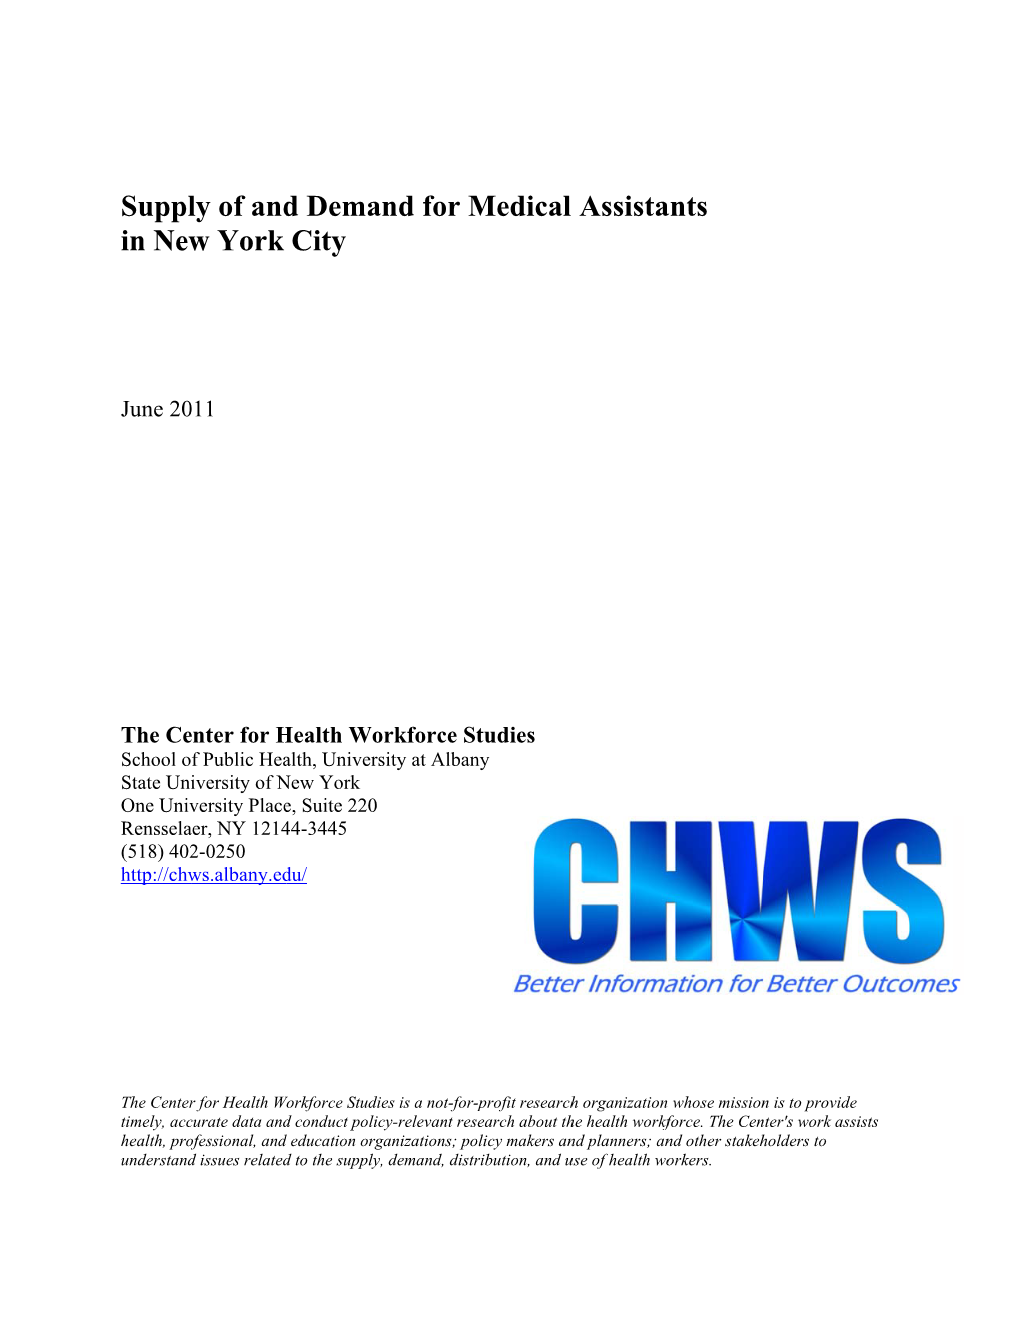 Supply of and Demand for Medical Assistants in New York City